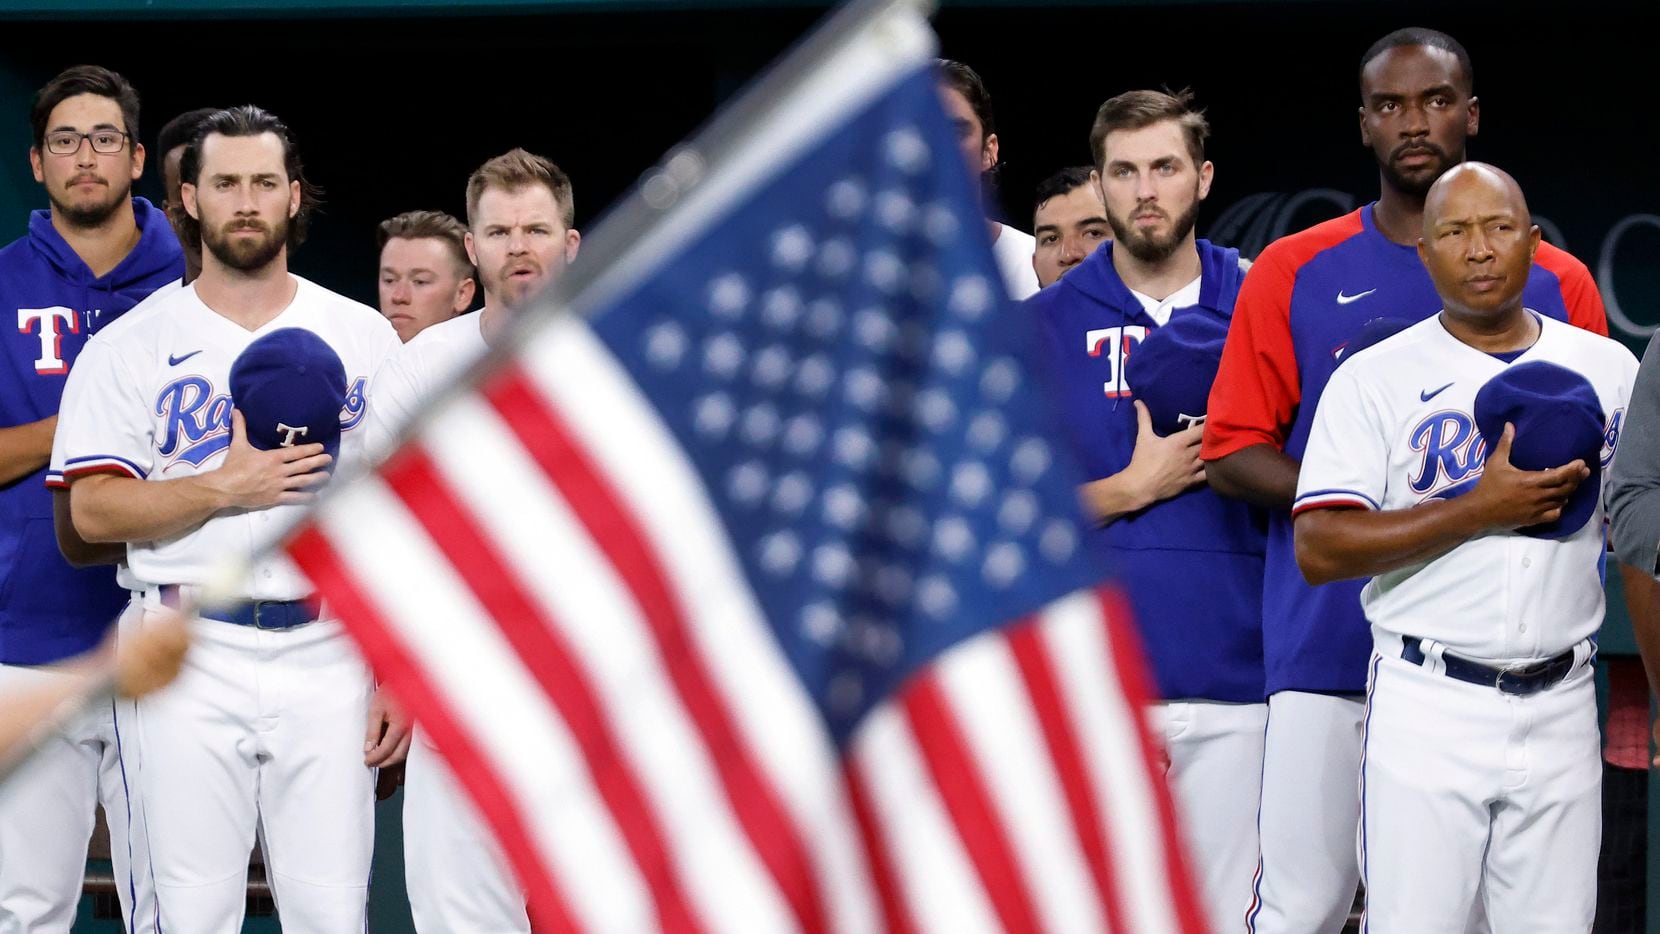 Texas Rangers players and coaches stand for the national anthem during the Texas Rangers Baseball Hall of Fame induction ceremony at Globe Life Field in Arlington, Saturday, August 14, 2021.